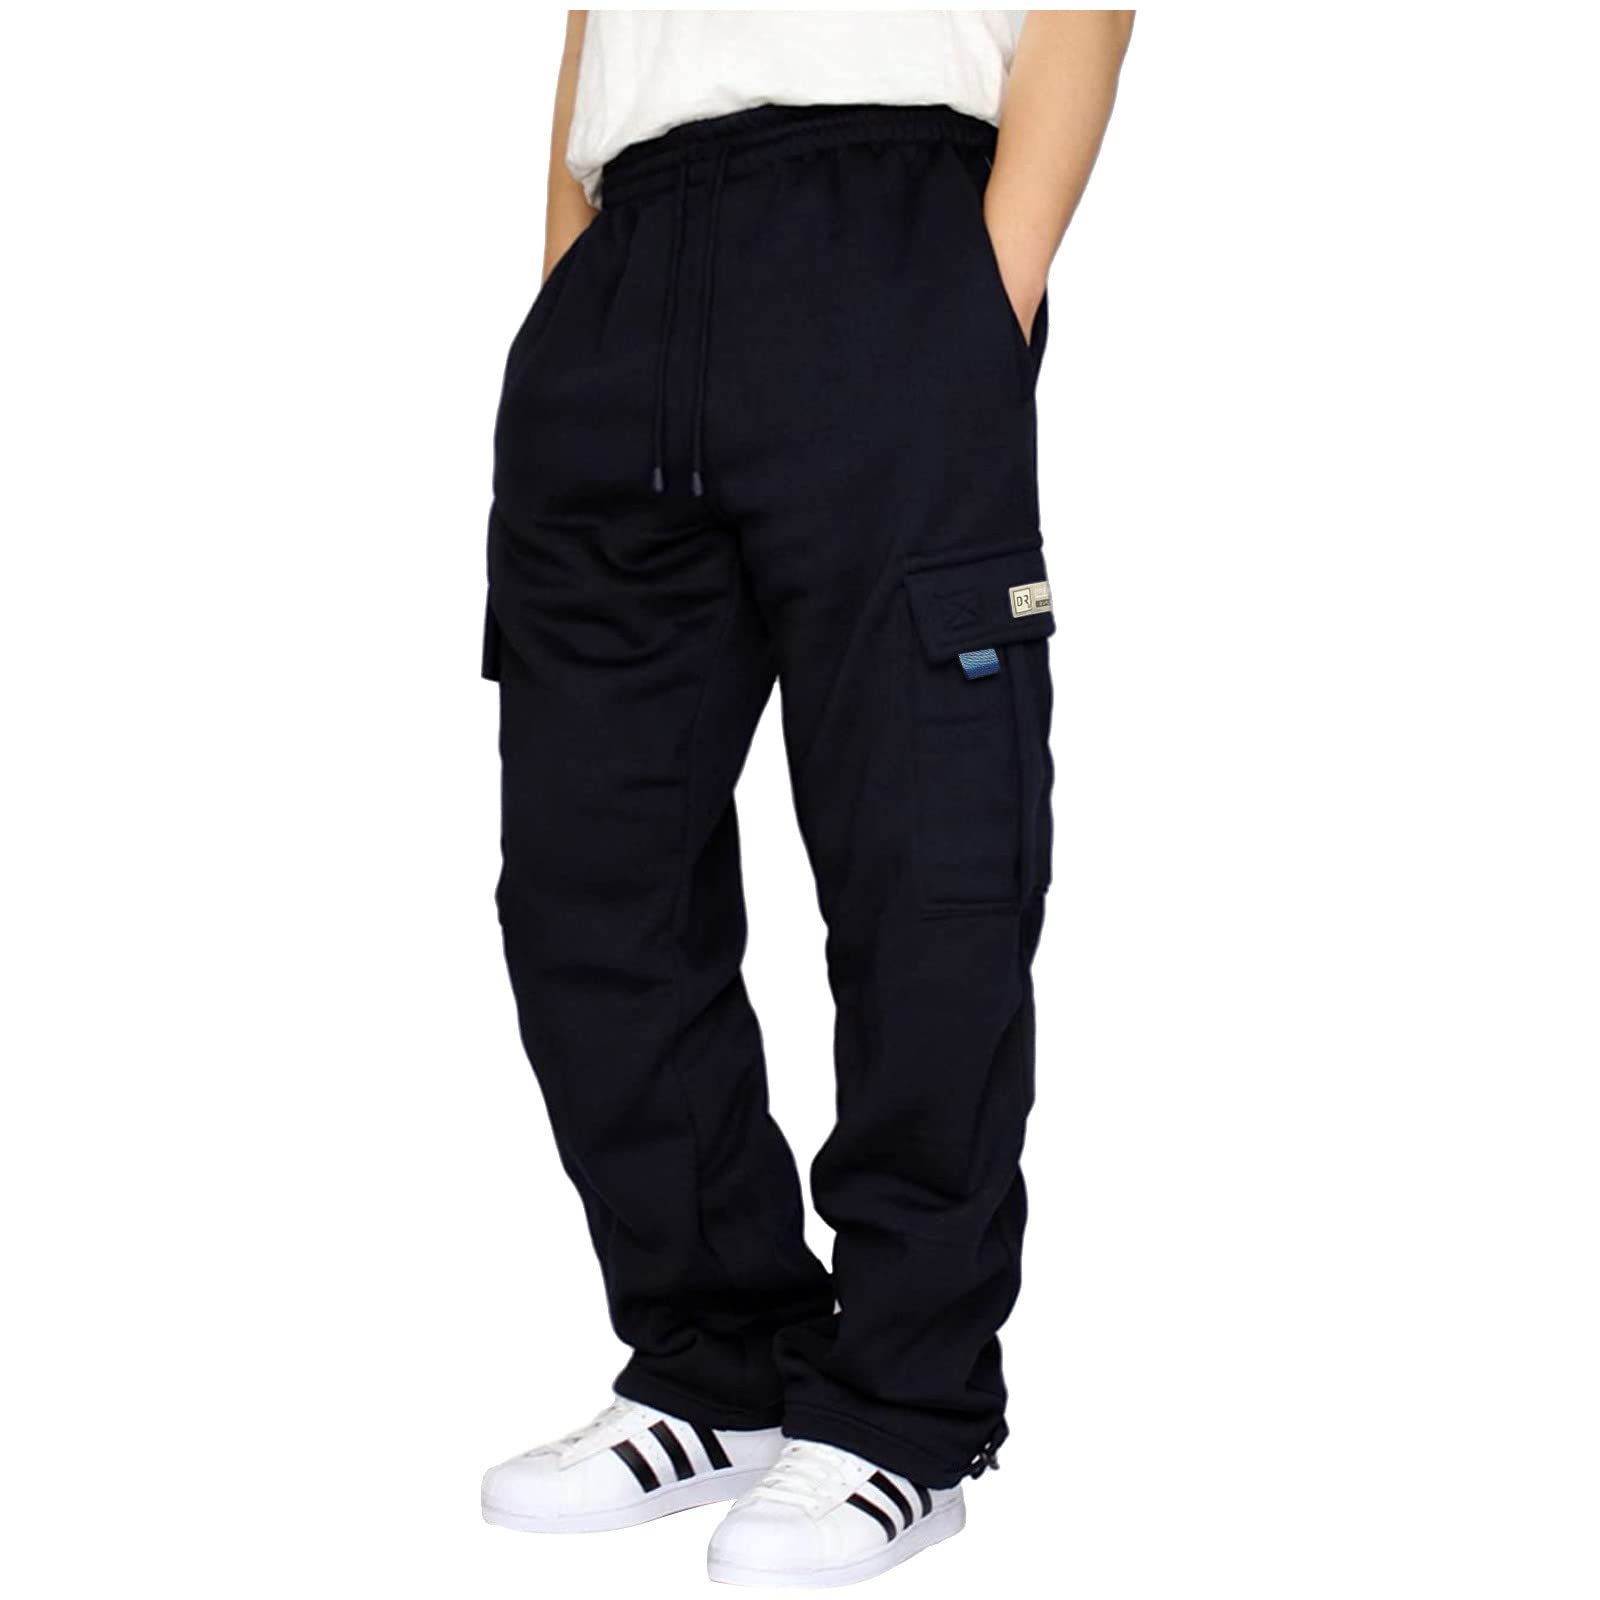  Best Valentine Ever Elastic Waist Mens Sweatpants Joggers Workout  Pants with Pockets for Gym Running S : Sports & Outdoors